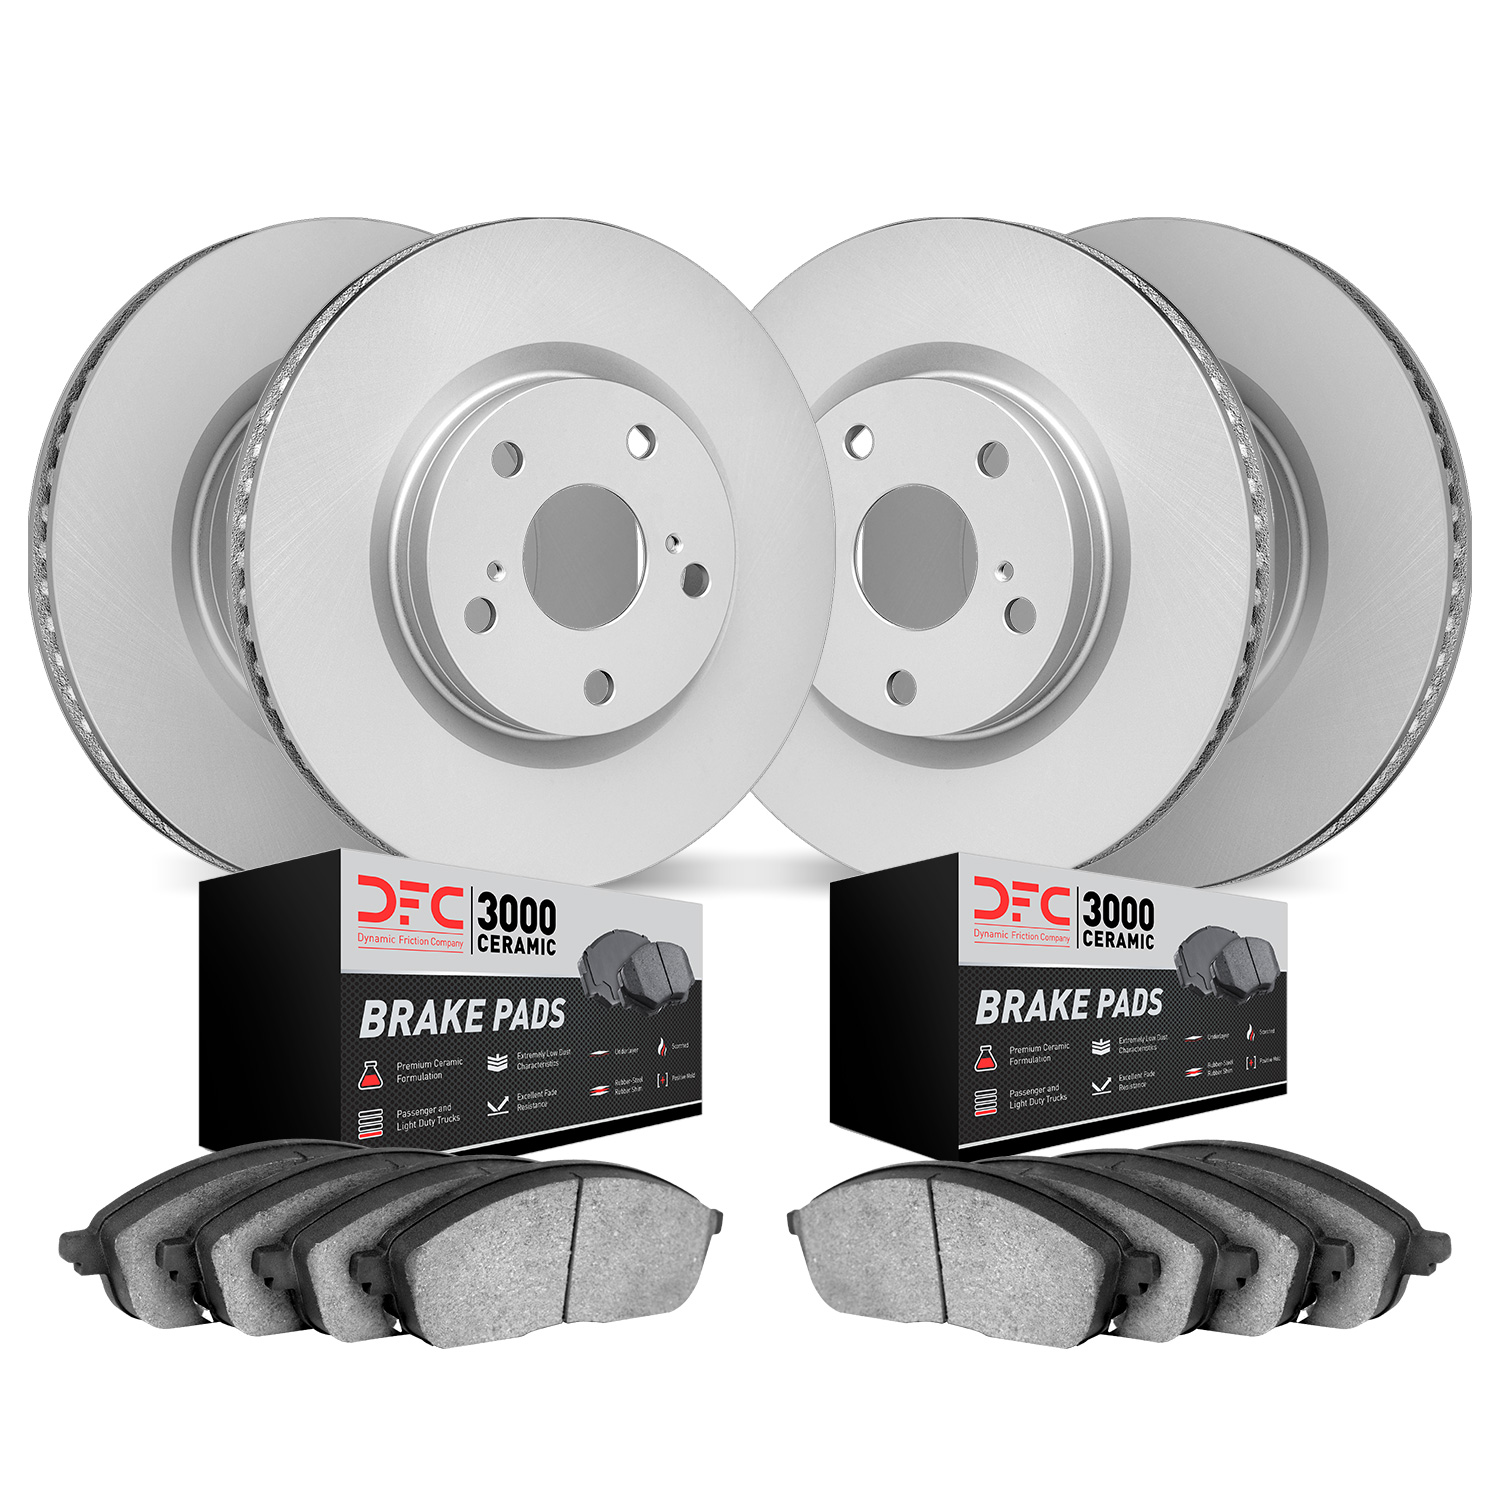 4304-31038 Geospec Brake Rotors with 3000-Series Ceramic Brake Pads Kit, 2004-2010 BMW, Position: Front and Rear